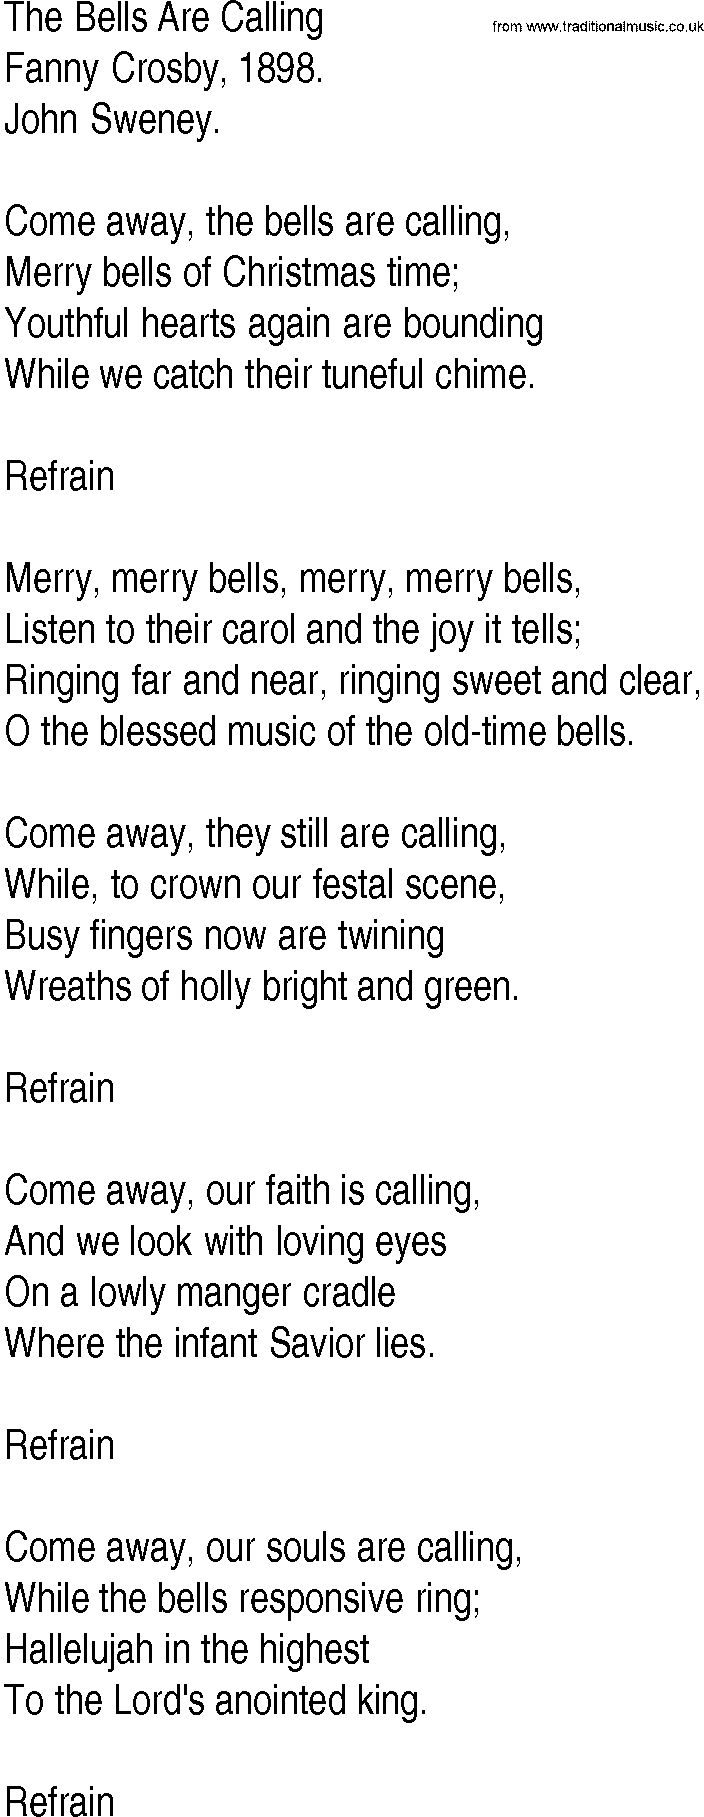 Hymn and Gospel Song: The Bells Are Calling by Fanny Crosby lyrics